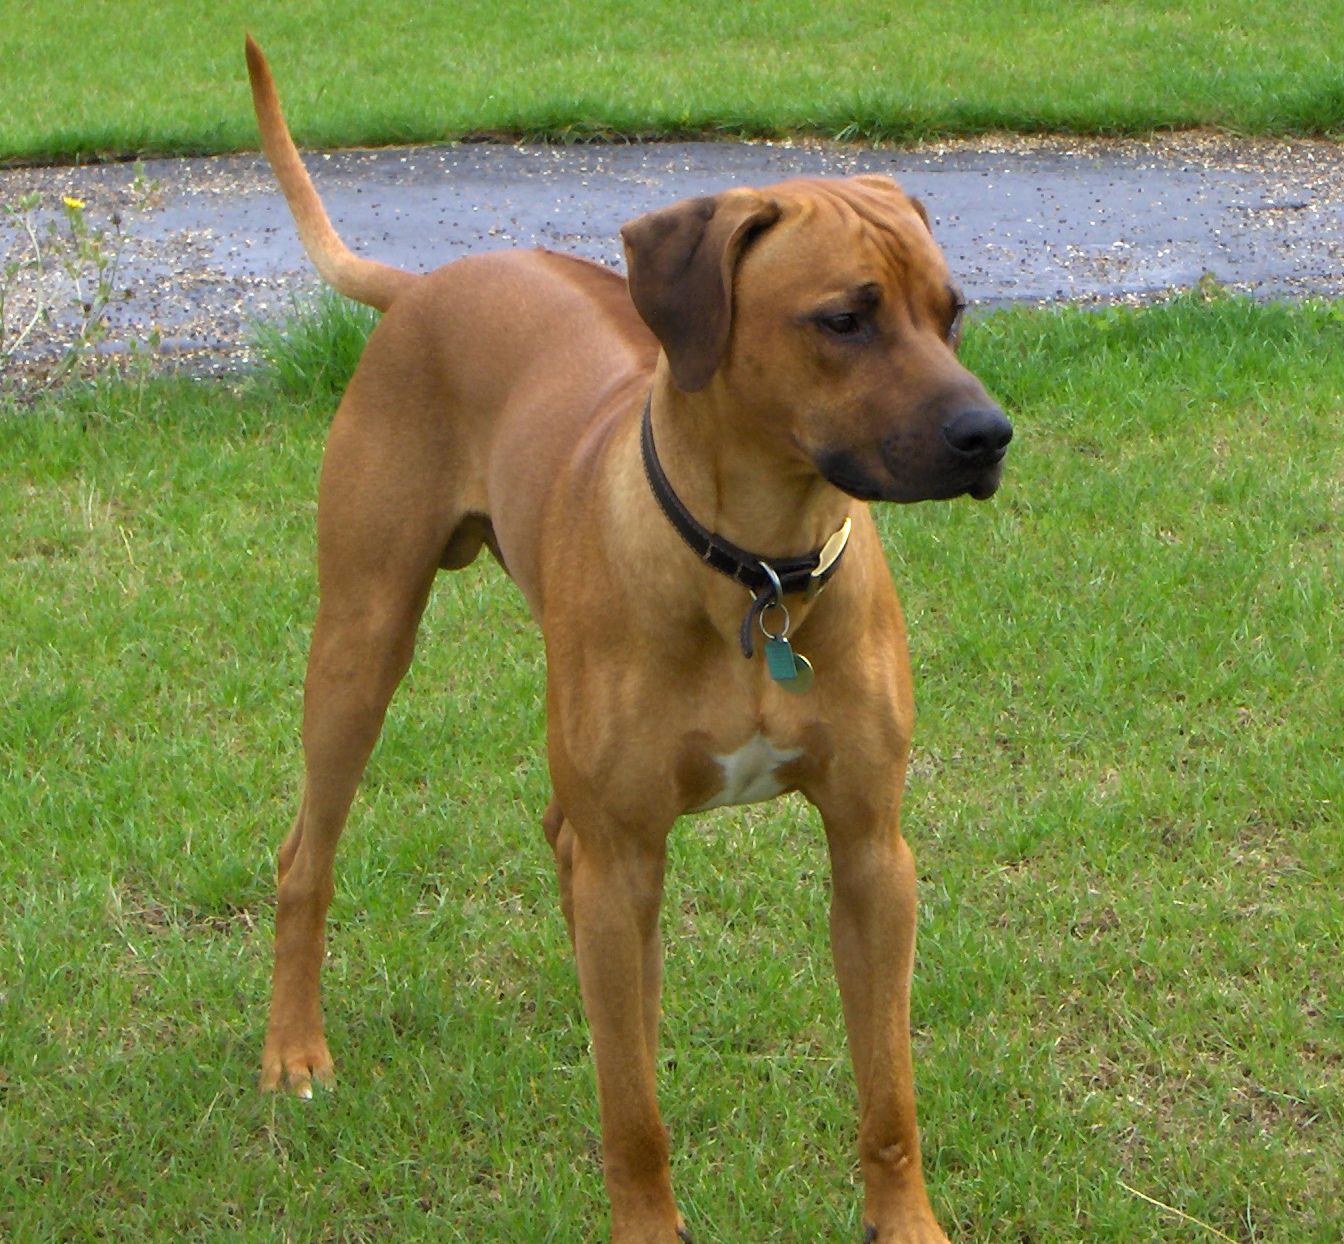 Rhodesian Ridgeback dog on the grass photo and wallpaper. Beautiful Rhodesian Ridgeback dog on the grass picture